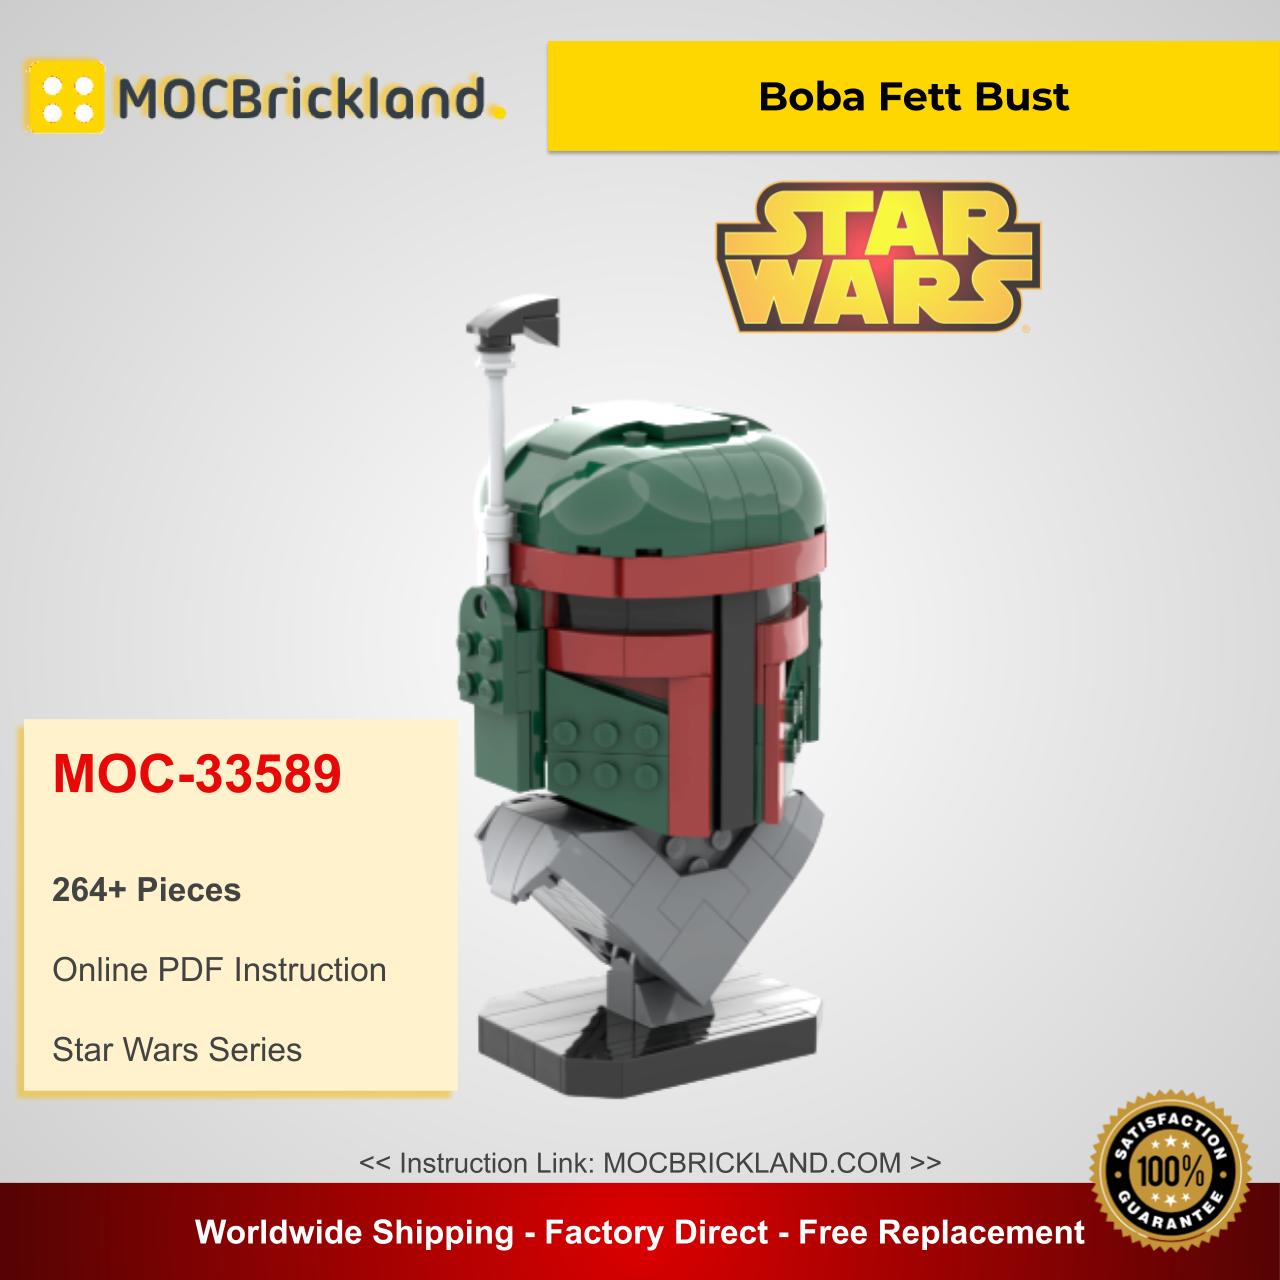 Boba Fett Bust MOC 33589 Star Wars Designed By FredL45 With 264 Pieces